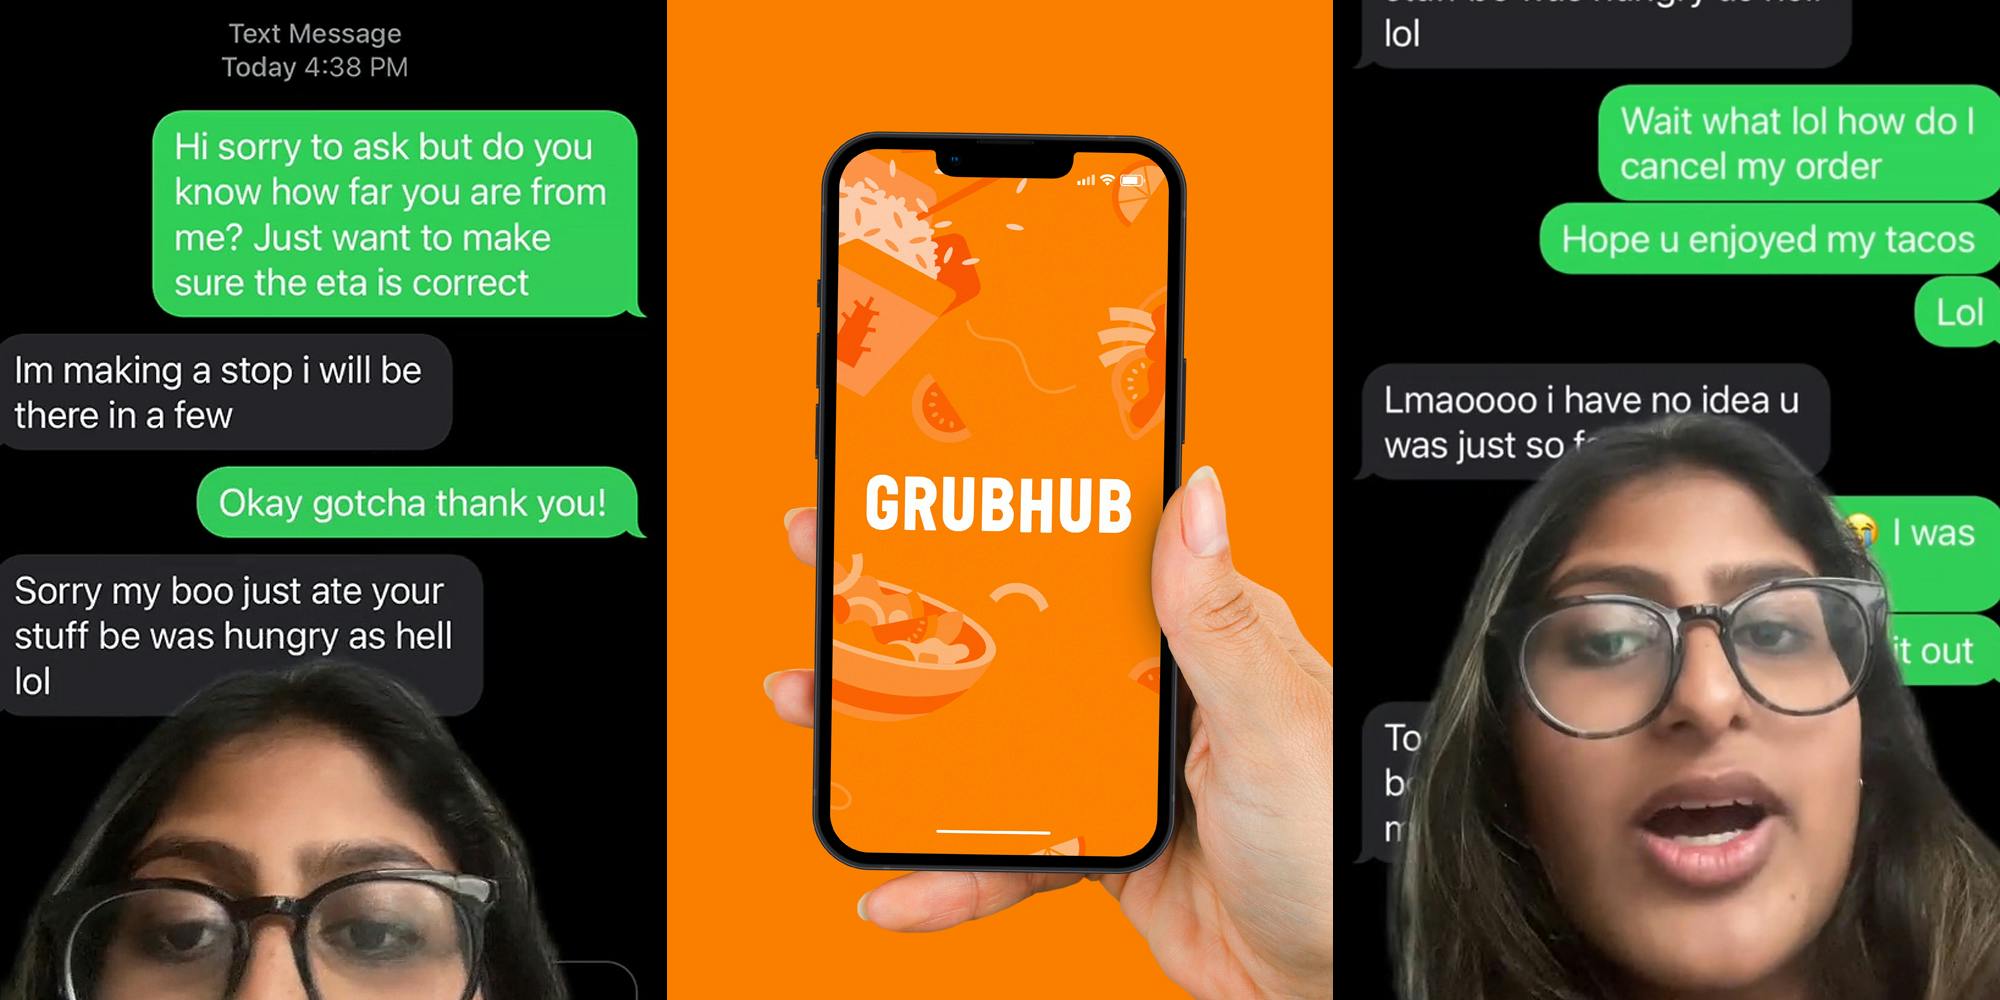 woman greenscreen TikTok over text messages "Hi sorry to ask but do you know how far you are from me? Just want to make sure the eta is correct" "Im making a stop i will be there in a few" "Okay gotcha thank you!" Sorry my boo just ate your stuff be was hungry as hell lol" (l) Grubhub app on phone in hand on orange background (c) Woman greenscreen TikTok over text messages "Wait what lol how do I cancel my order Hope u enjoyed my tacos Lol" "Lmaoooo i have no idea u was just so far" (r)